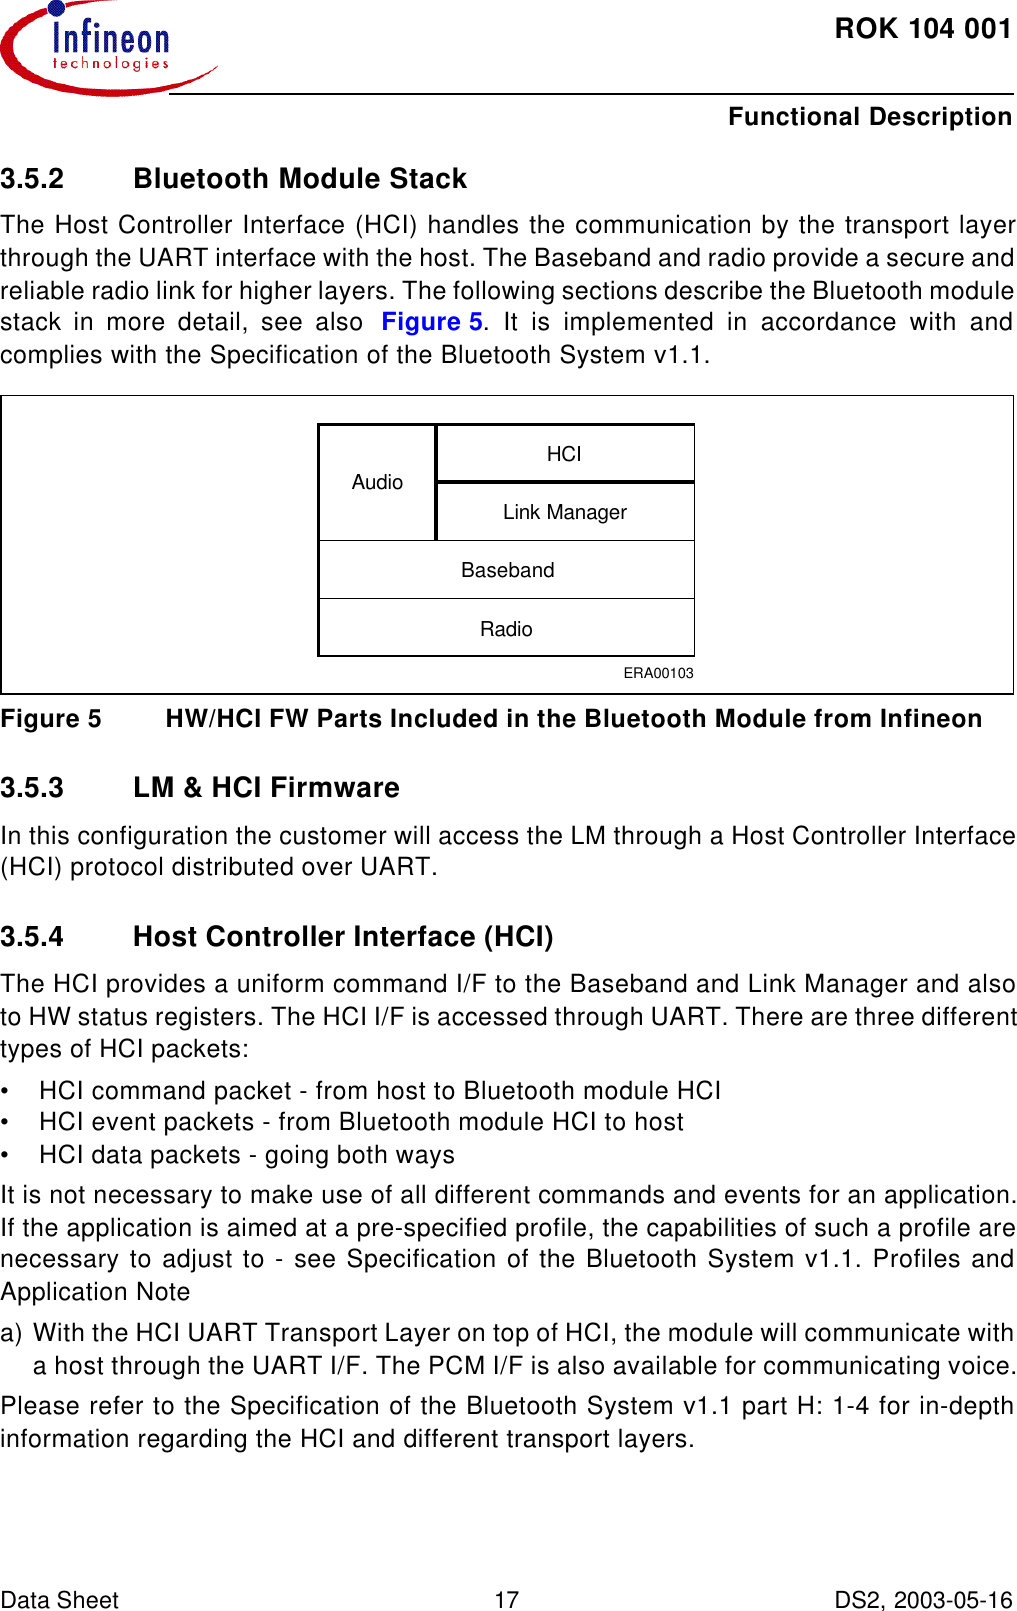 ROK104001Functional Description Data Sheet 17 DS2, 2003-05-16  3.5.2 Bluetooth Module StackThe Host Controller Interface (HCI) handles the communication by the transport layerthrough the UART interface with the host. The Baseband and radio provide a secure andreliable radio link for higher layers. The following sections describe the Bluetooth modulestack in more detail, see also  Figure5. It is implemented in accordance with andcomplies with the Specification of the Bluetooth System v1.1.Figure5 HW/HCI FW Parts Included in the Bluetooth Module from Infineon3.5.3 LM &amp; HCI FirmwareIn this configuration the customer will access the LM through a Host Controller Interface(HCI) protocol distributed over UART.3.5.4 Host Controller Interface (HCI)The HCI provides a uniform command I/F to the Baseband and Link Manager and alsoto HW status registers. The HCI I/F is accessed through UART. There are three differenttypes of HCI packets:•HCI command packet - from host to Bluetooth module HCI•HCI event packets - from Bluetooth module HCI to host•HCI data packets - going both waysIt is not necessary to make use of all different commands and events for an application.If the application is aimed at a pre-specified profile, the capabilities of such a profile arenecessary to adjust to - see Specification of the Bluetooth System v1.1. Profiles andApplication Notea) With the HCI UART Transport Layer on top of HCI, the module will communicate witha host through the UART I/F. The PCM I/F is also available for communicating voice.Please refer to the Specification of the Bluetooth System v1.1 part H: 1-4 for in-depthinformation regarding the HCI and different transport layers.ERA00103AudioHCILink ManagerBasebandRadio